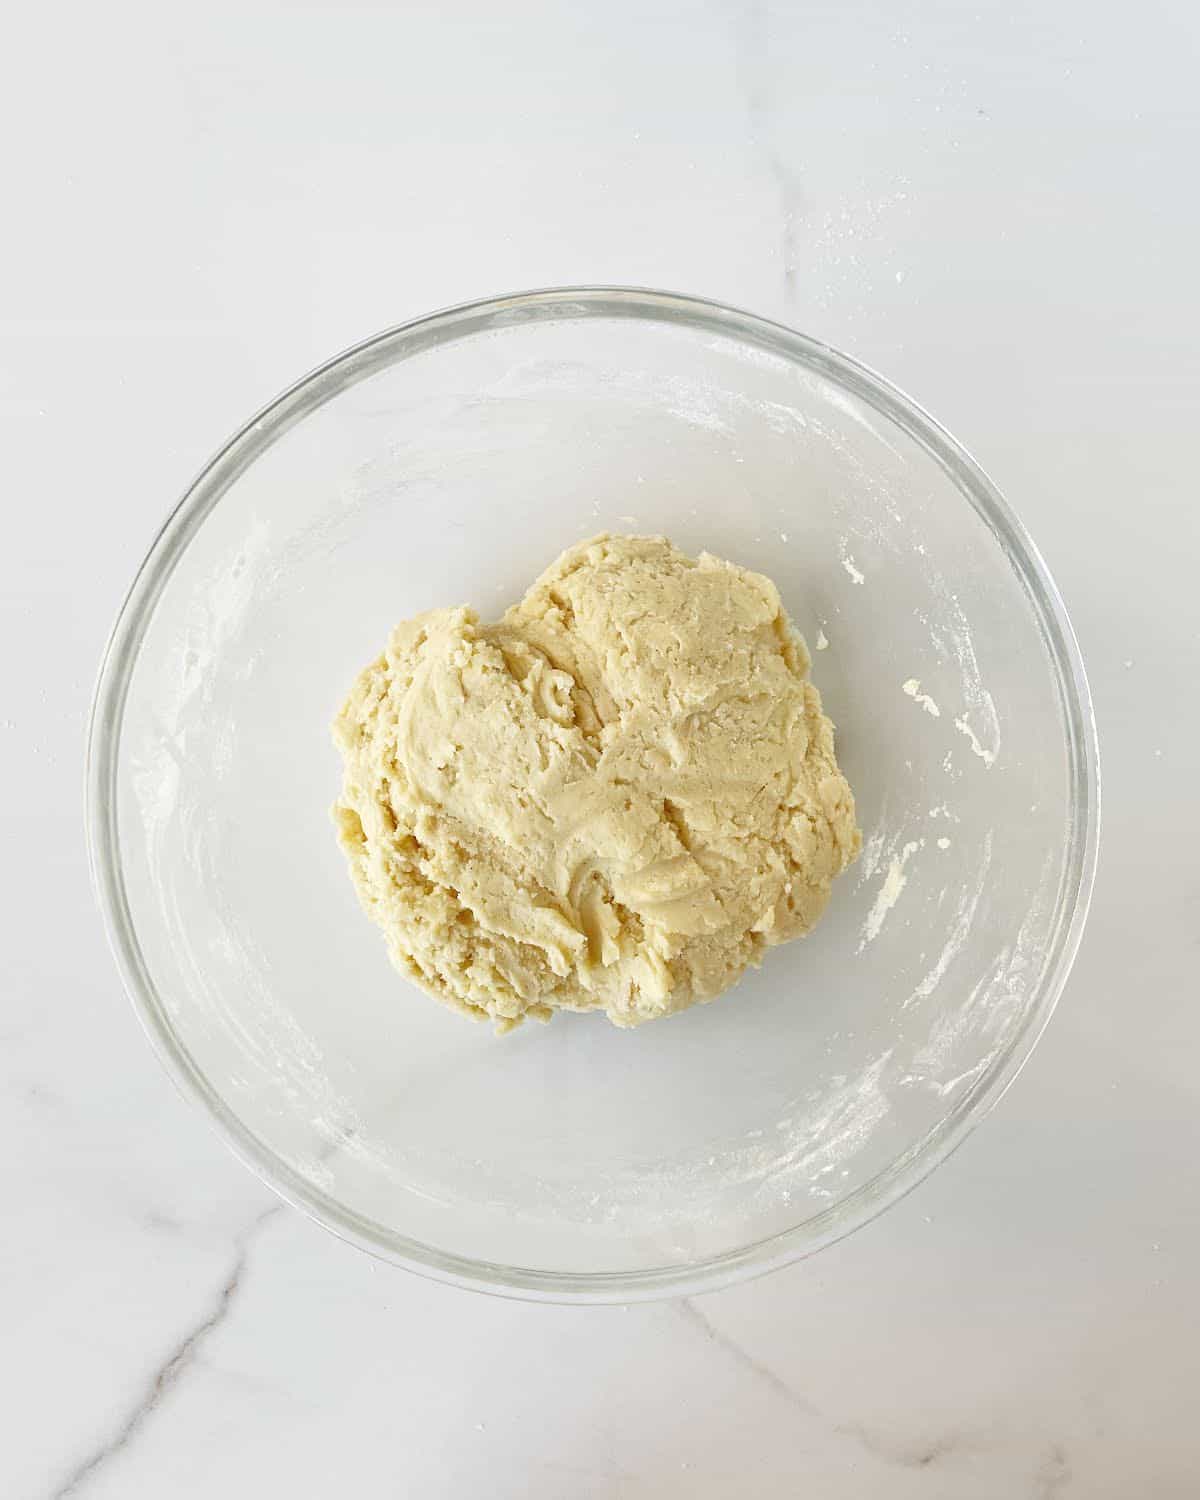 Cookie dough for thumbprints in a glass bowl on a white marble surface.